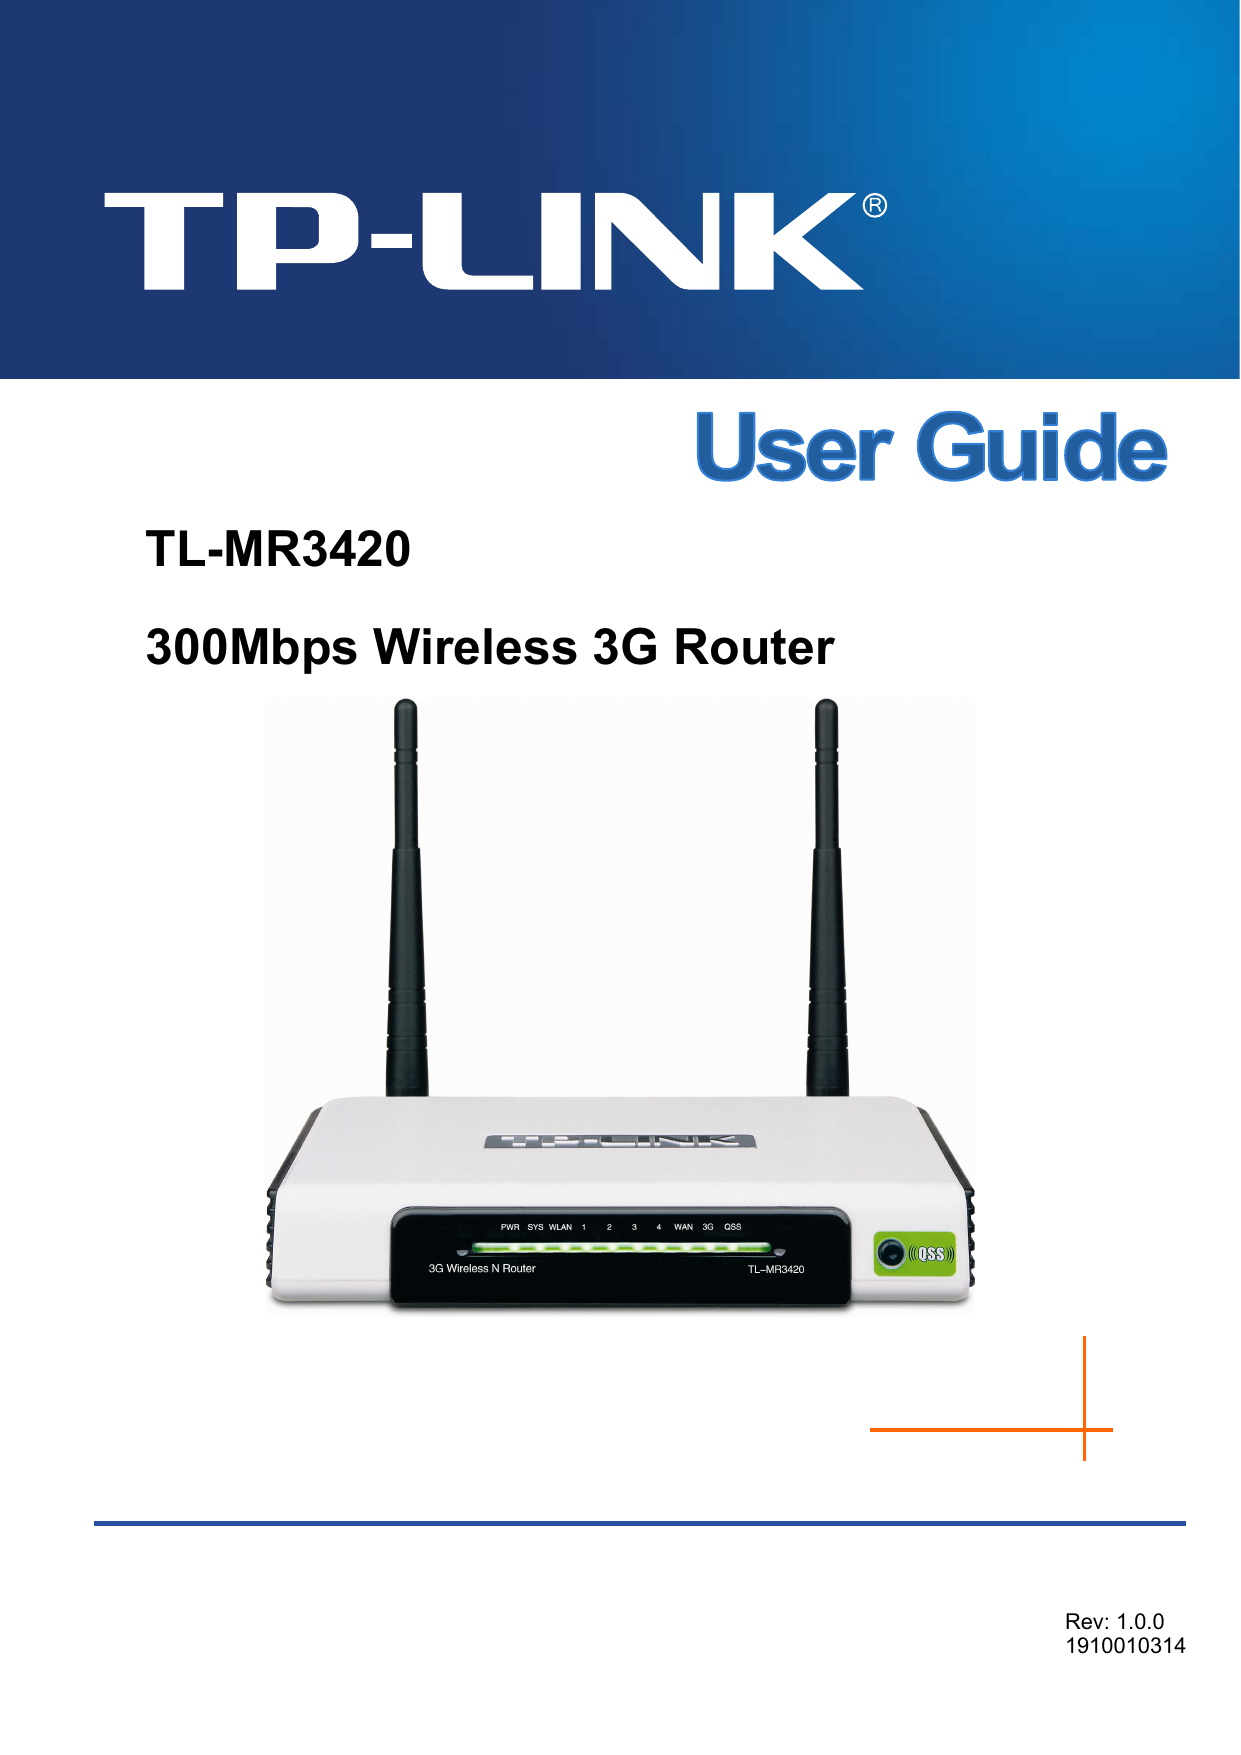     TL-MR3420 300Mbps Wireless 3G Router    Rev: 1.0.0 1910010314 